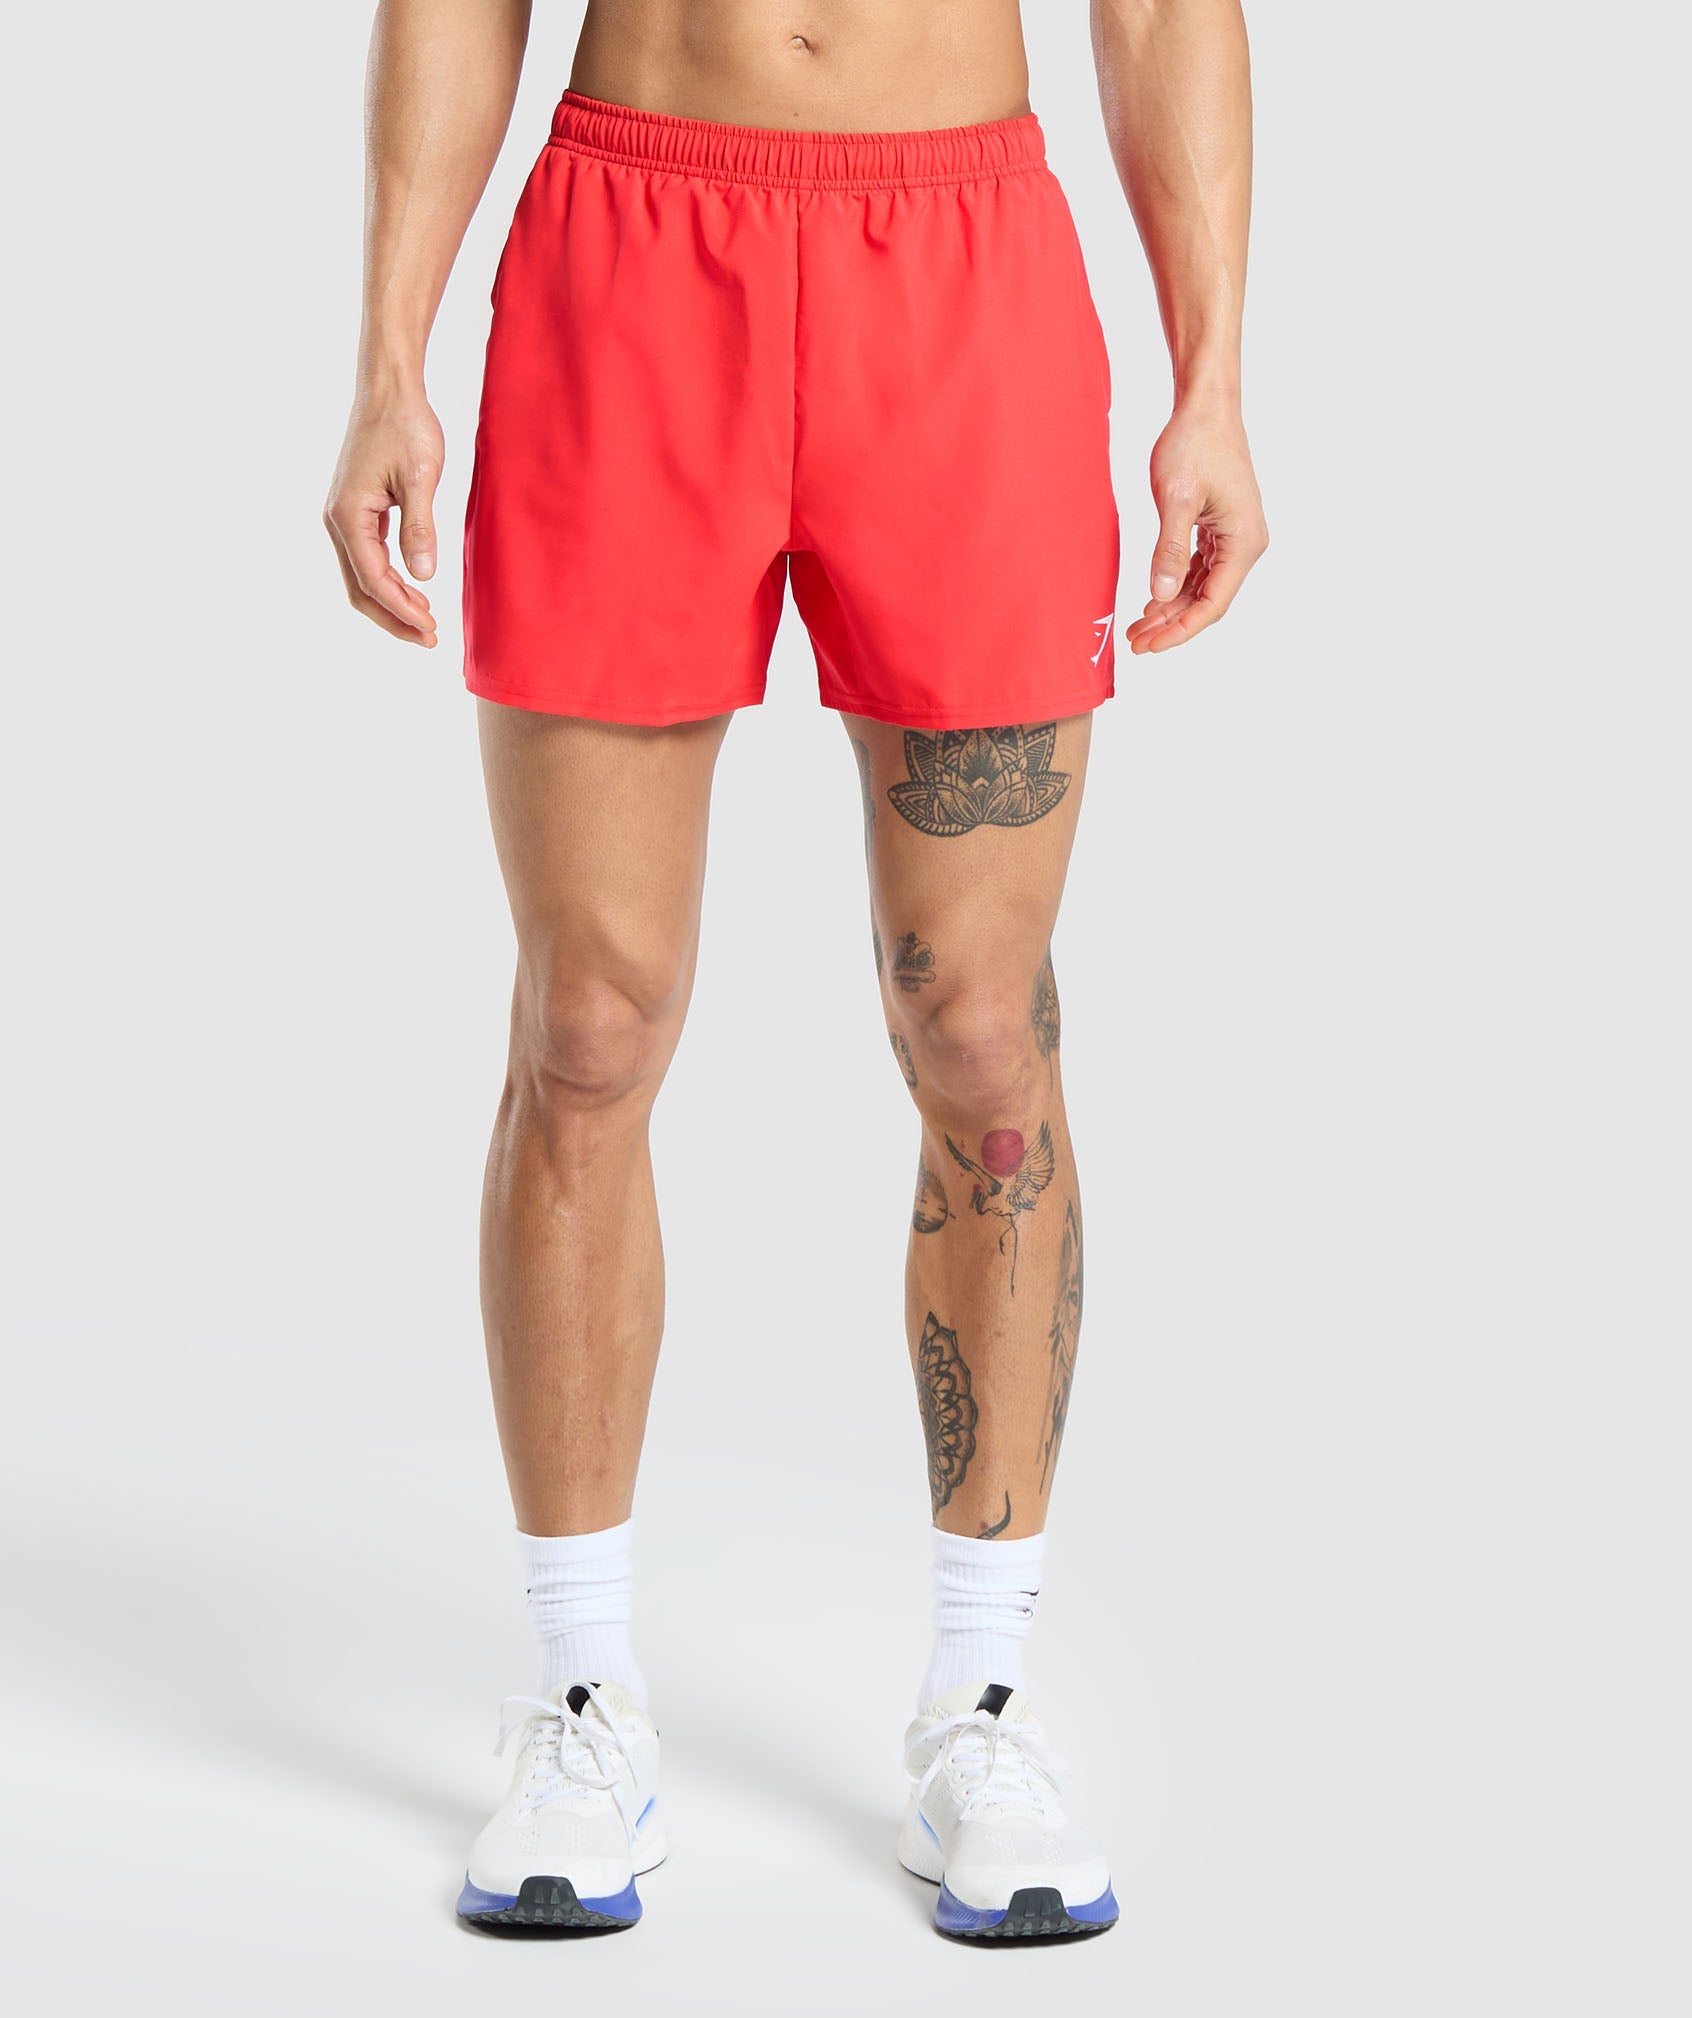 Arrival 5" Shorts in Pow Red is out of stock